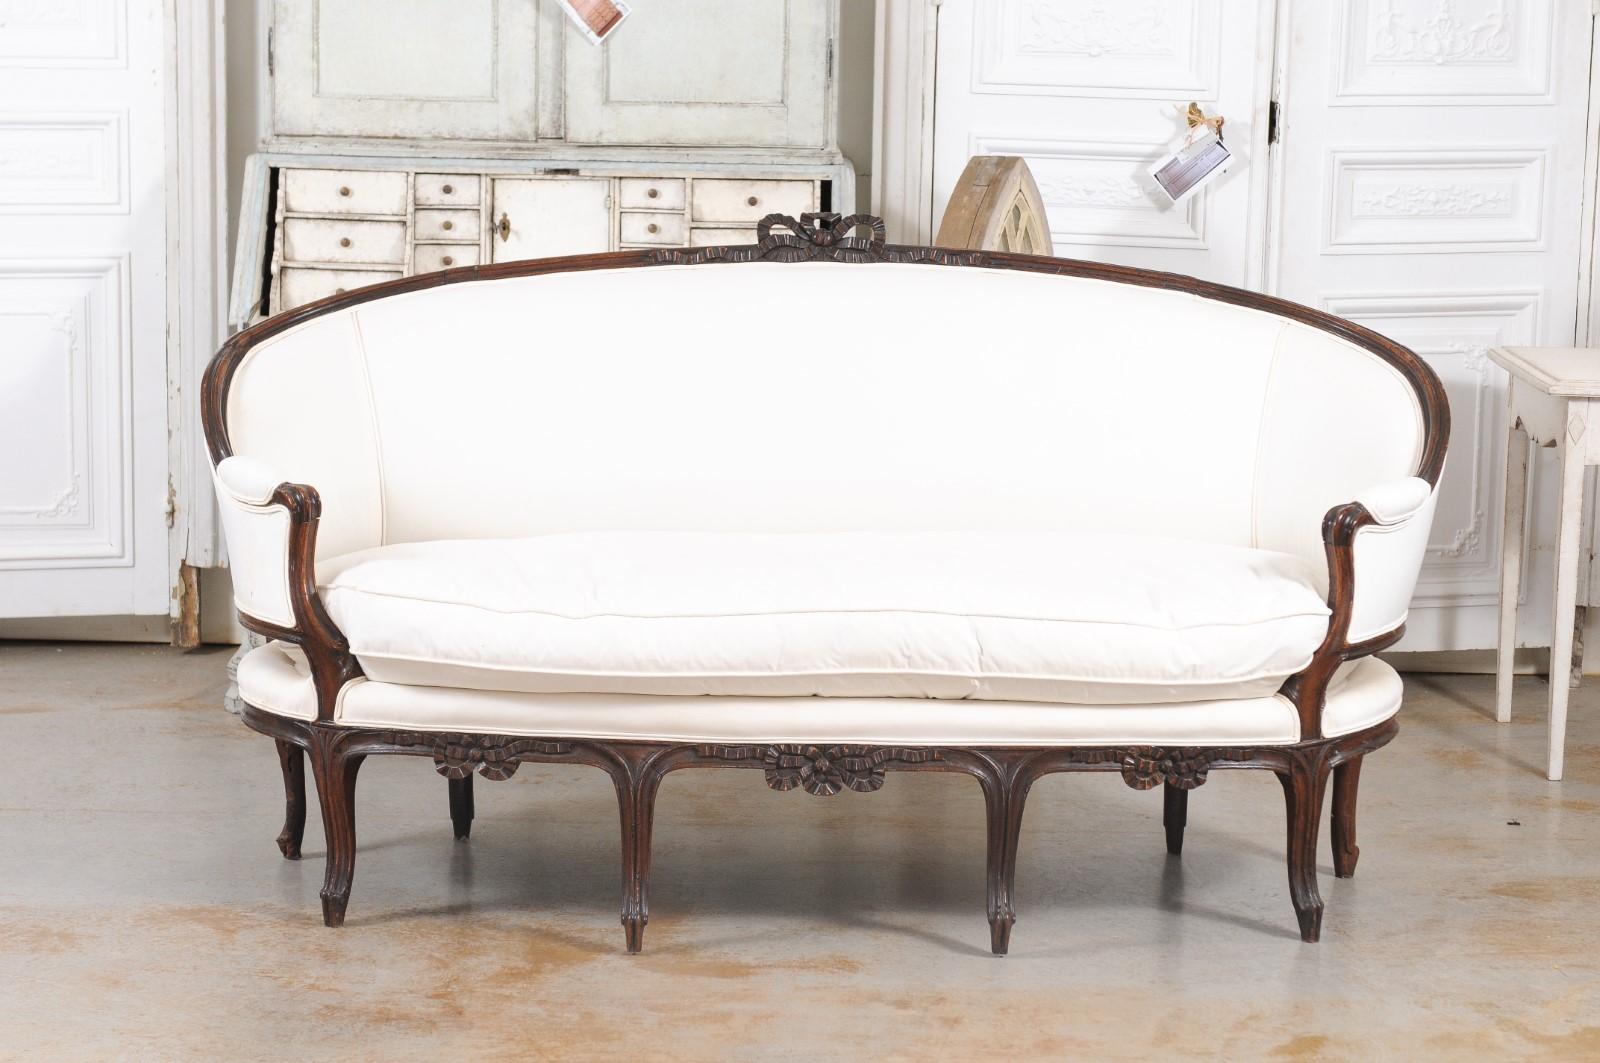 A French Louis XV walnut canapé en corbeille from the late 18th century, with carved bow and new upholstery. Created in France during the last decade of the 18th century, this canapé en corbeille reflects the delicate transition that happened